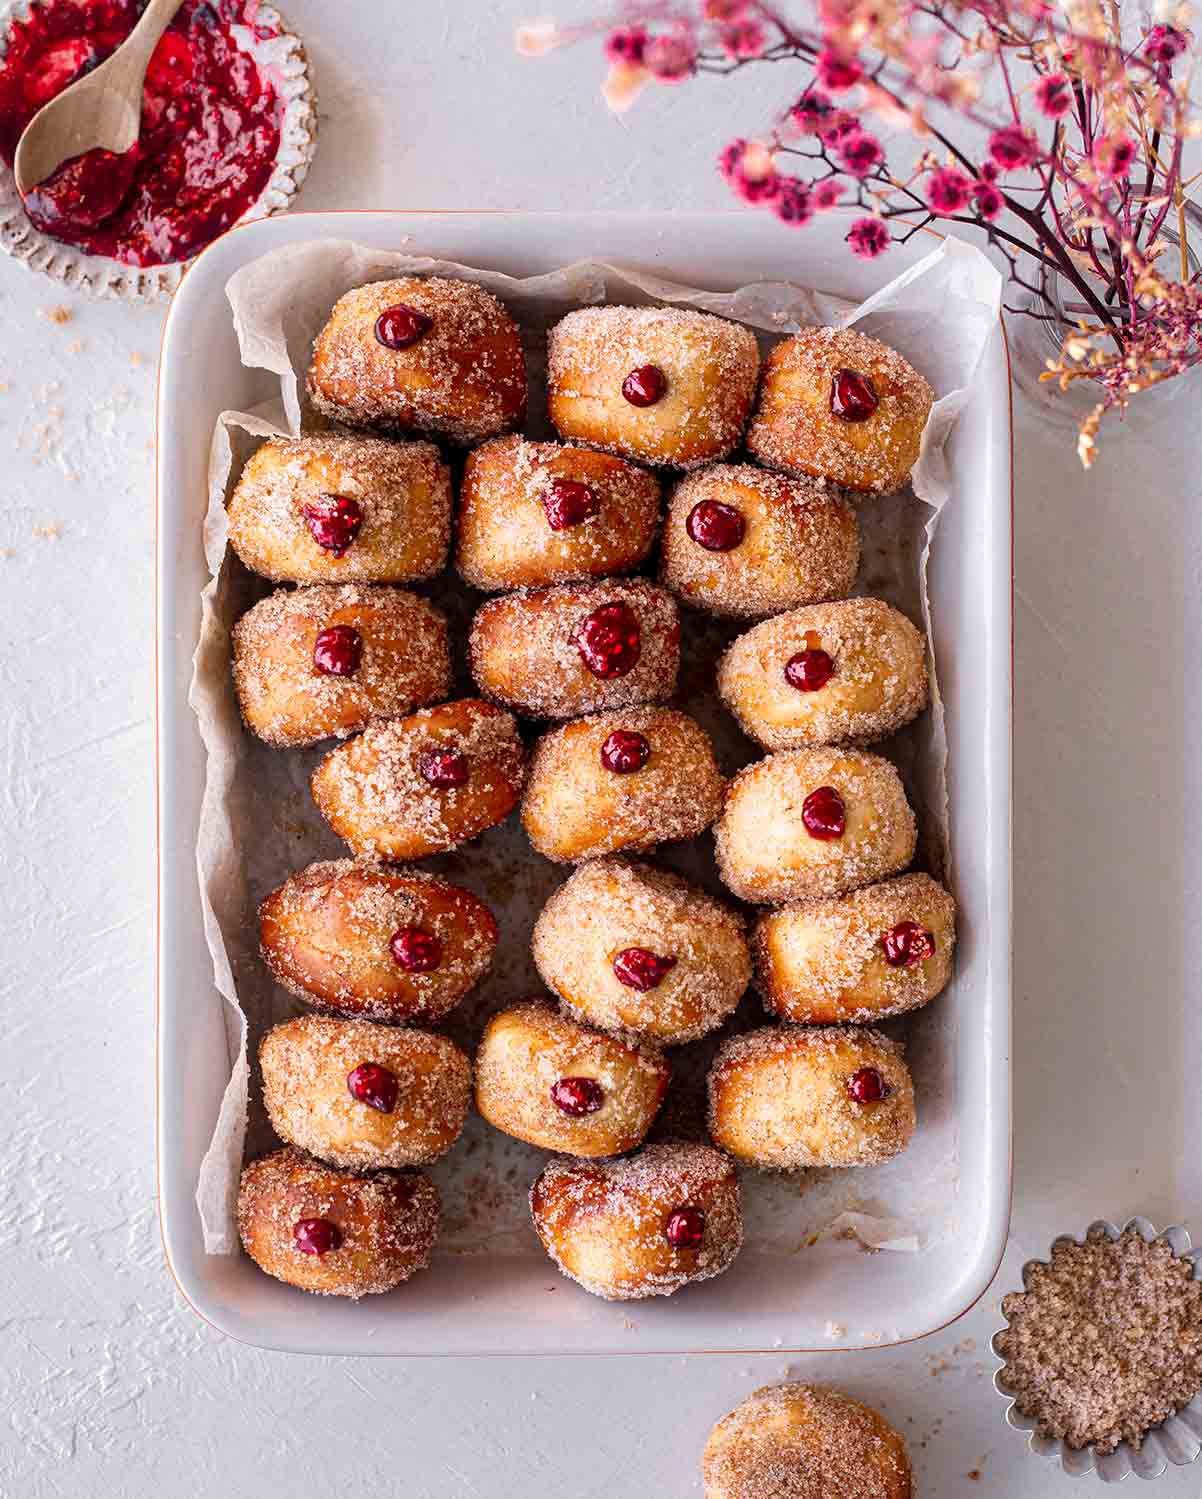 Lots of sugared mini donuts in a lined baking tray. Each donut has a little raspberry jam popping out.